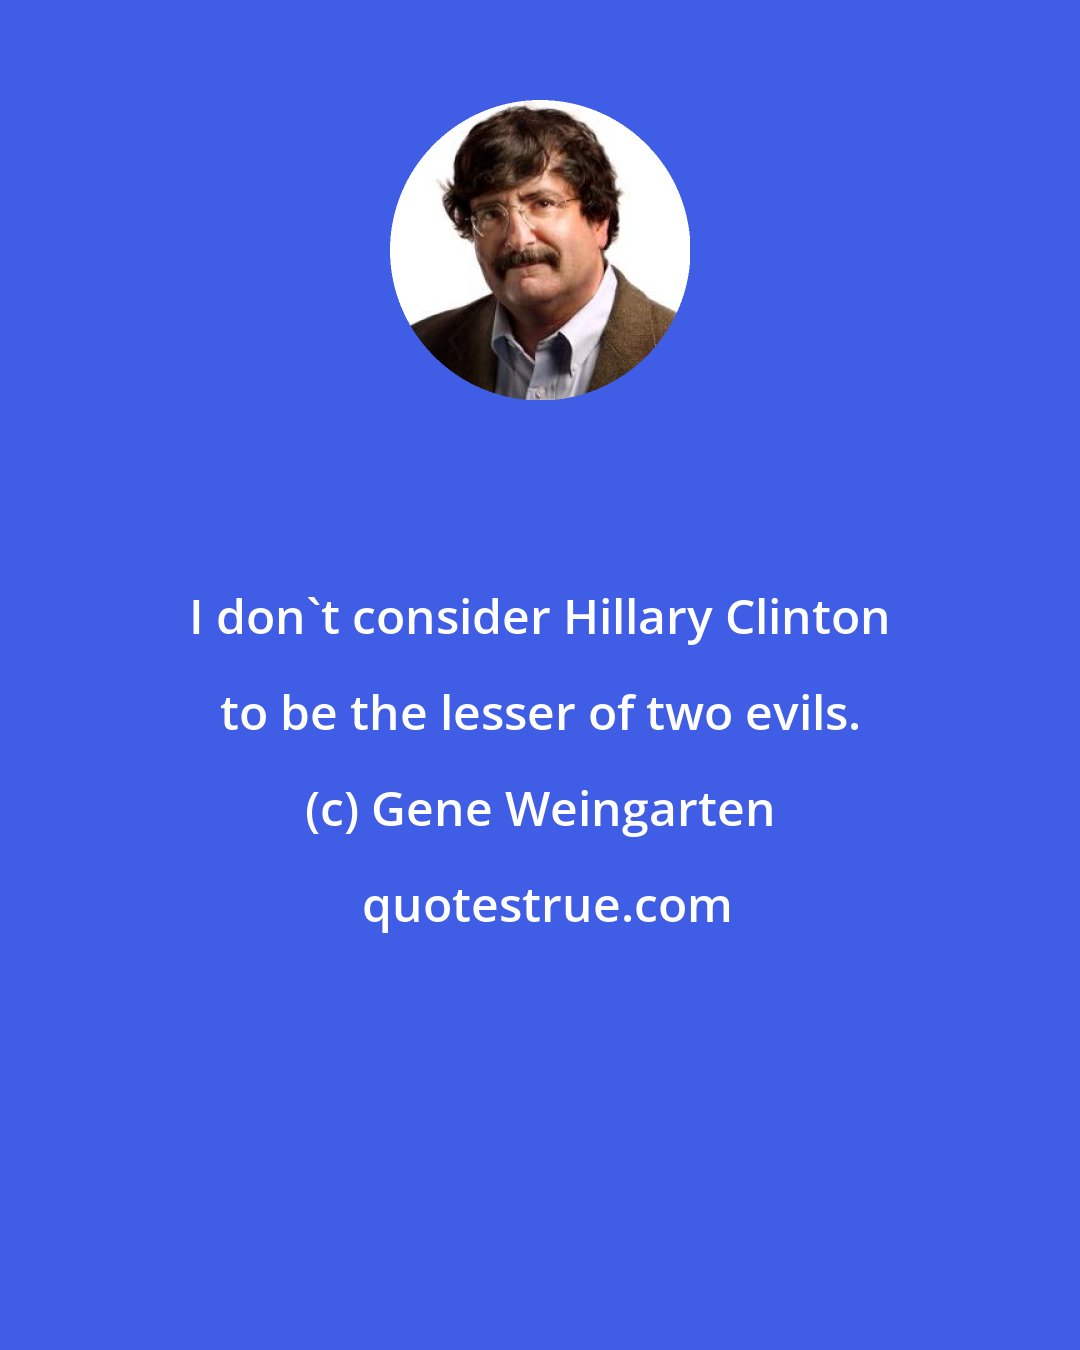 Gene Weingarten: I don't consider Hillary Clinton to be the lesser of two evils.